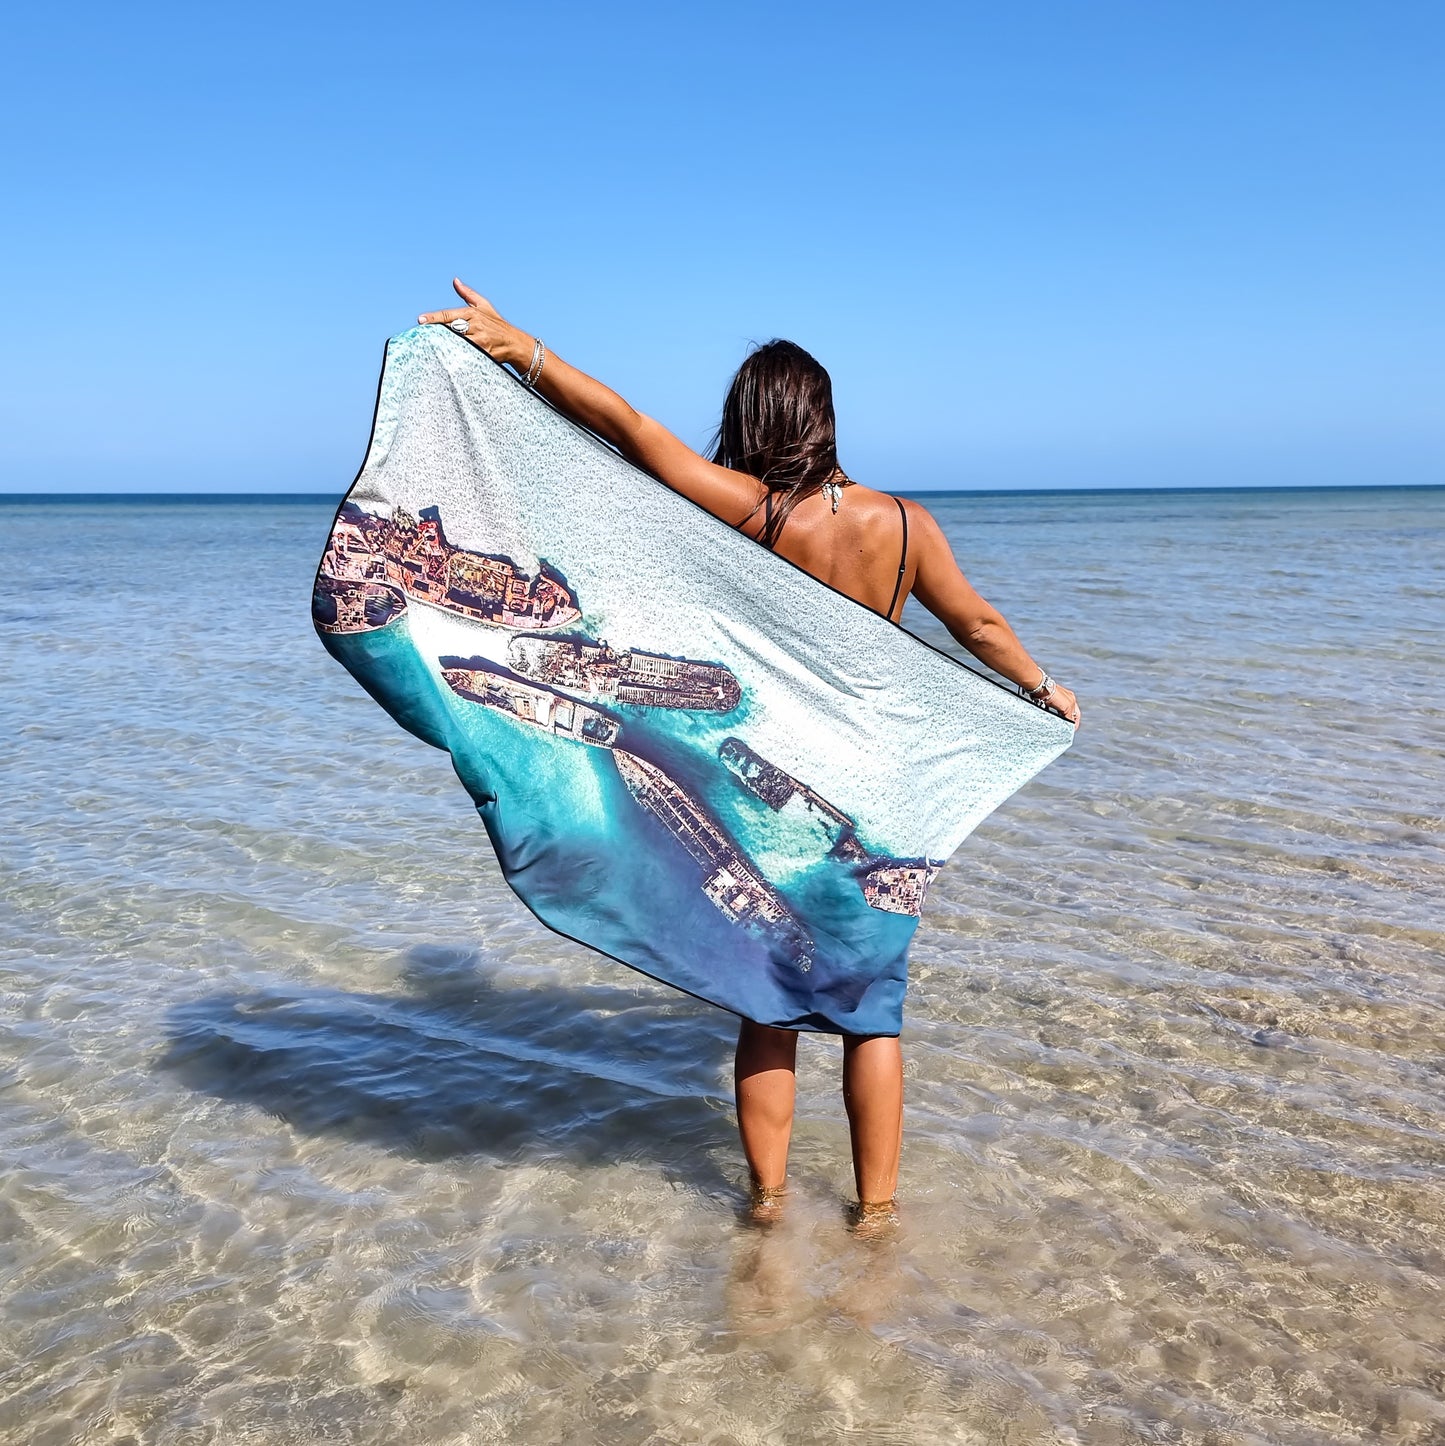 Tangalooma Wrecks Travel TowelSand Free Microfiber Travel Towel For the beach, travelling, camping, exercising and more! Sustainably made using post-consumer plastic in the form of recycled Polyester (rPET)Inspired by the iconic cluster of sunken ship wrecks off Moreton Island, QLD15 ships were sunk by the Queensland Government between 1963 and 1984 to provide safe anchorage for recreational boat owners on the Eastern side of Moreton Bay.Now home to a large variety of reef fish, coral and marine life, makin